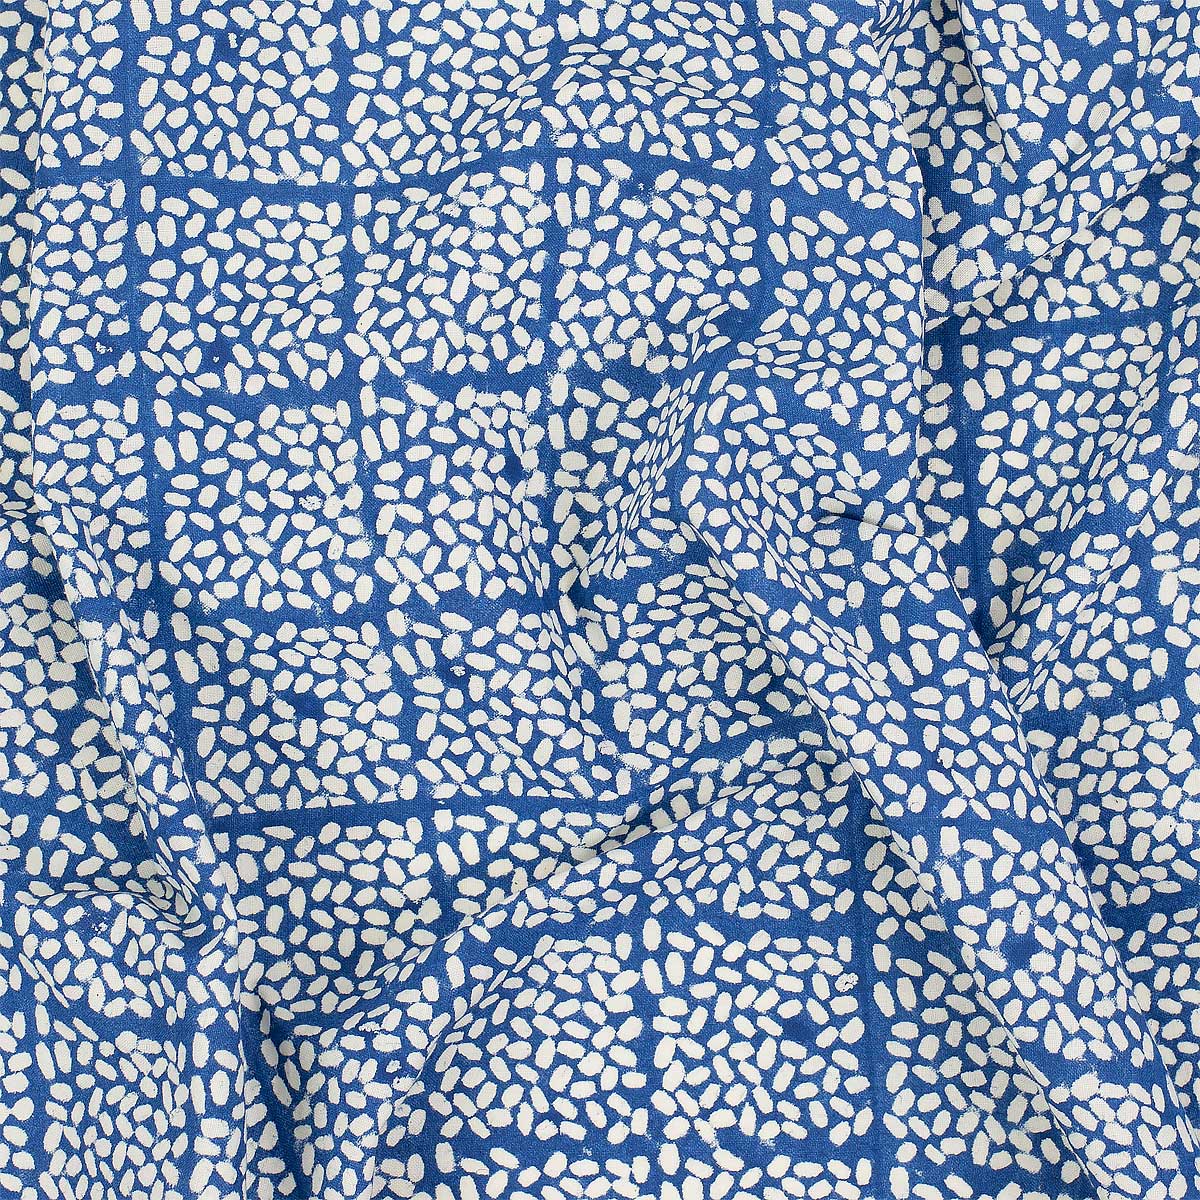 SEED Fabric, blue/white